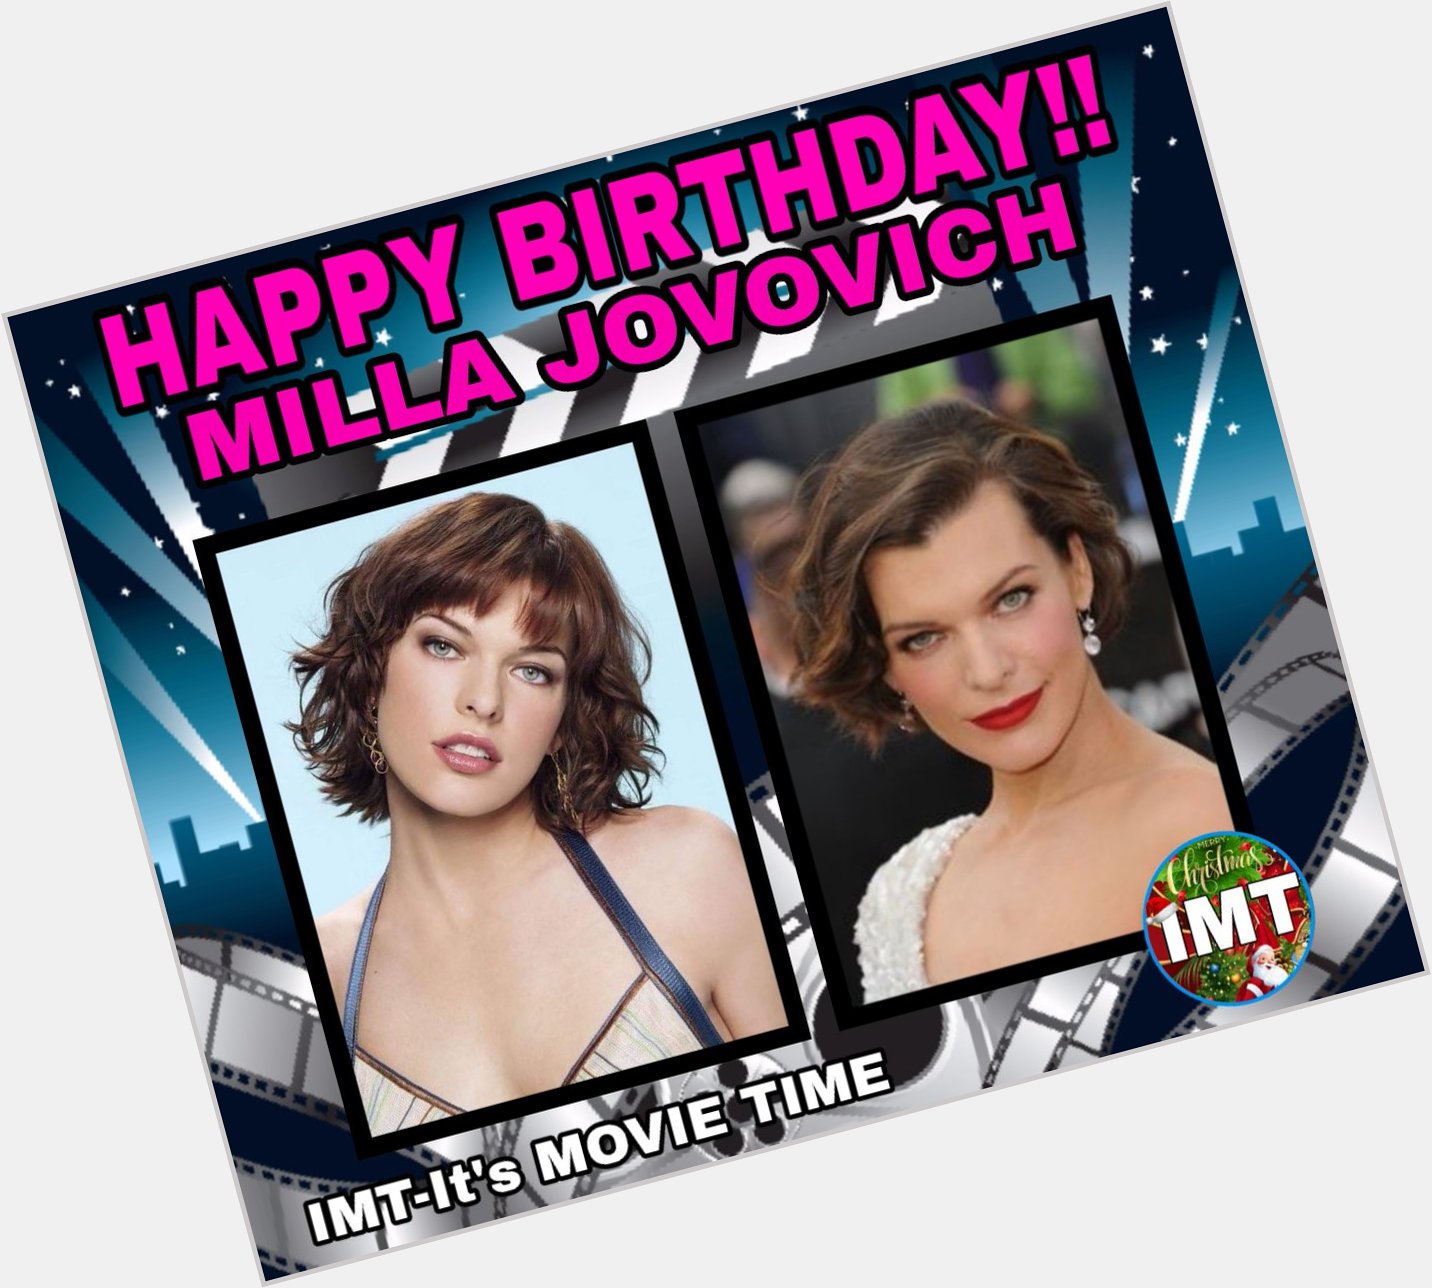 Happy Birthday to the Beautiful Milla Jovovich! The actress is celebrating 44 years 